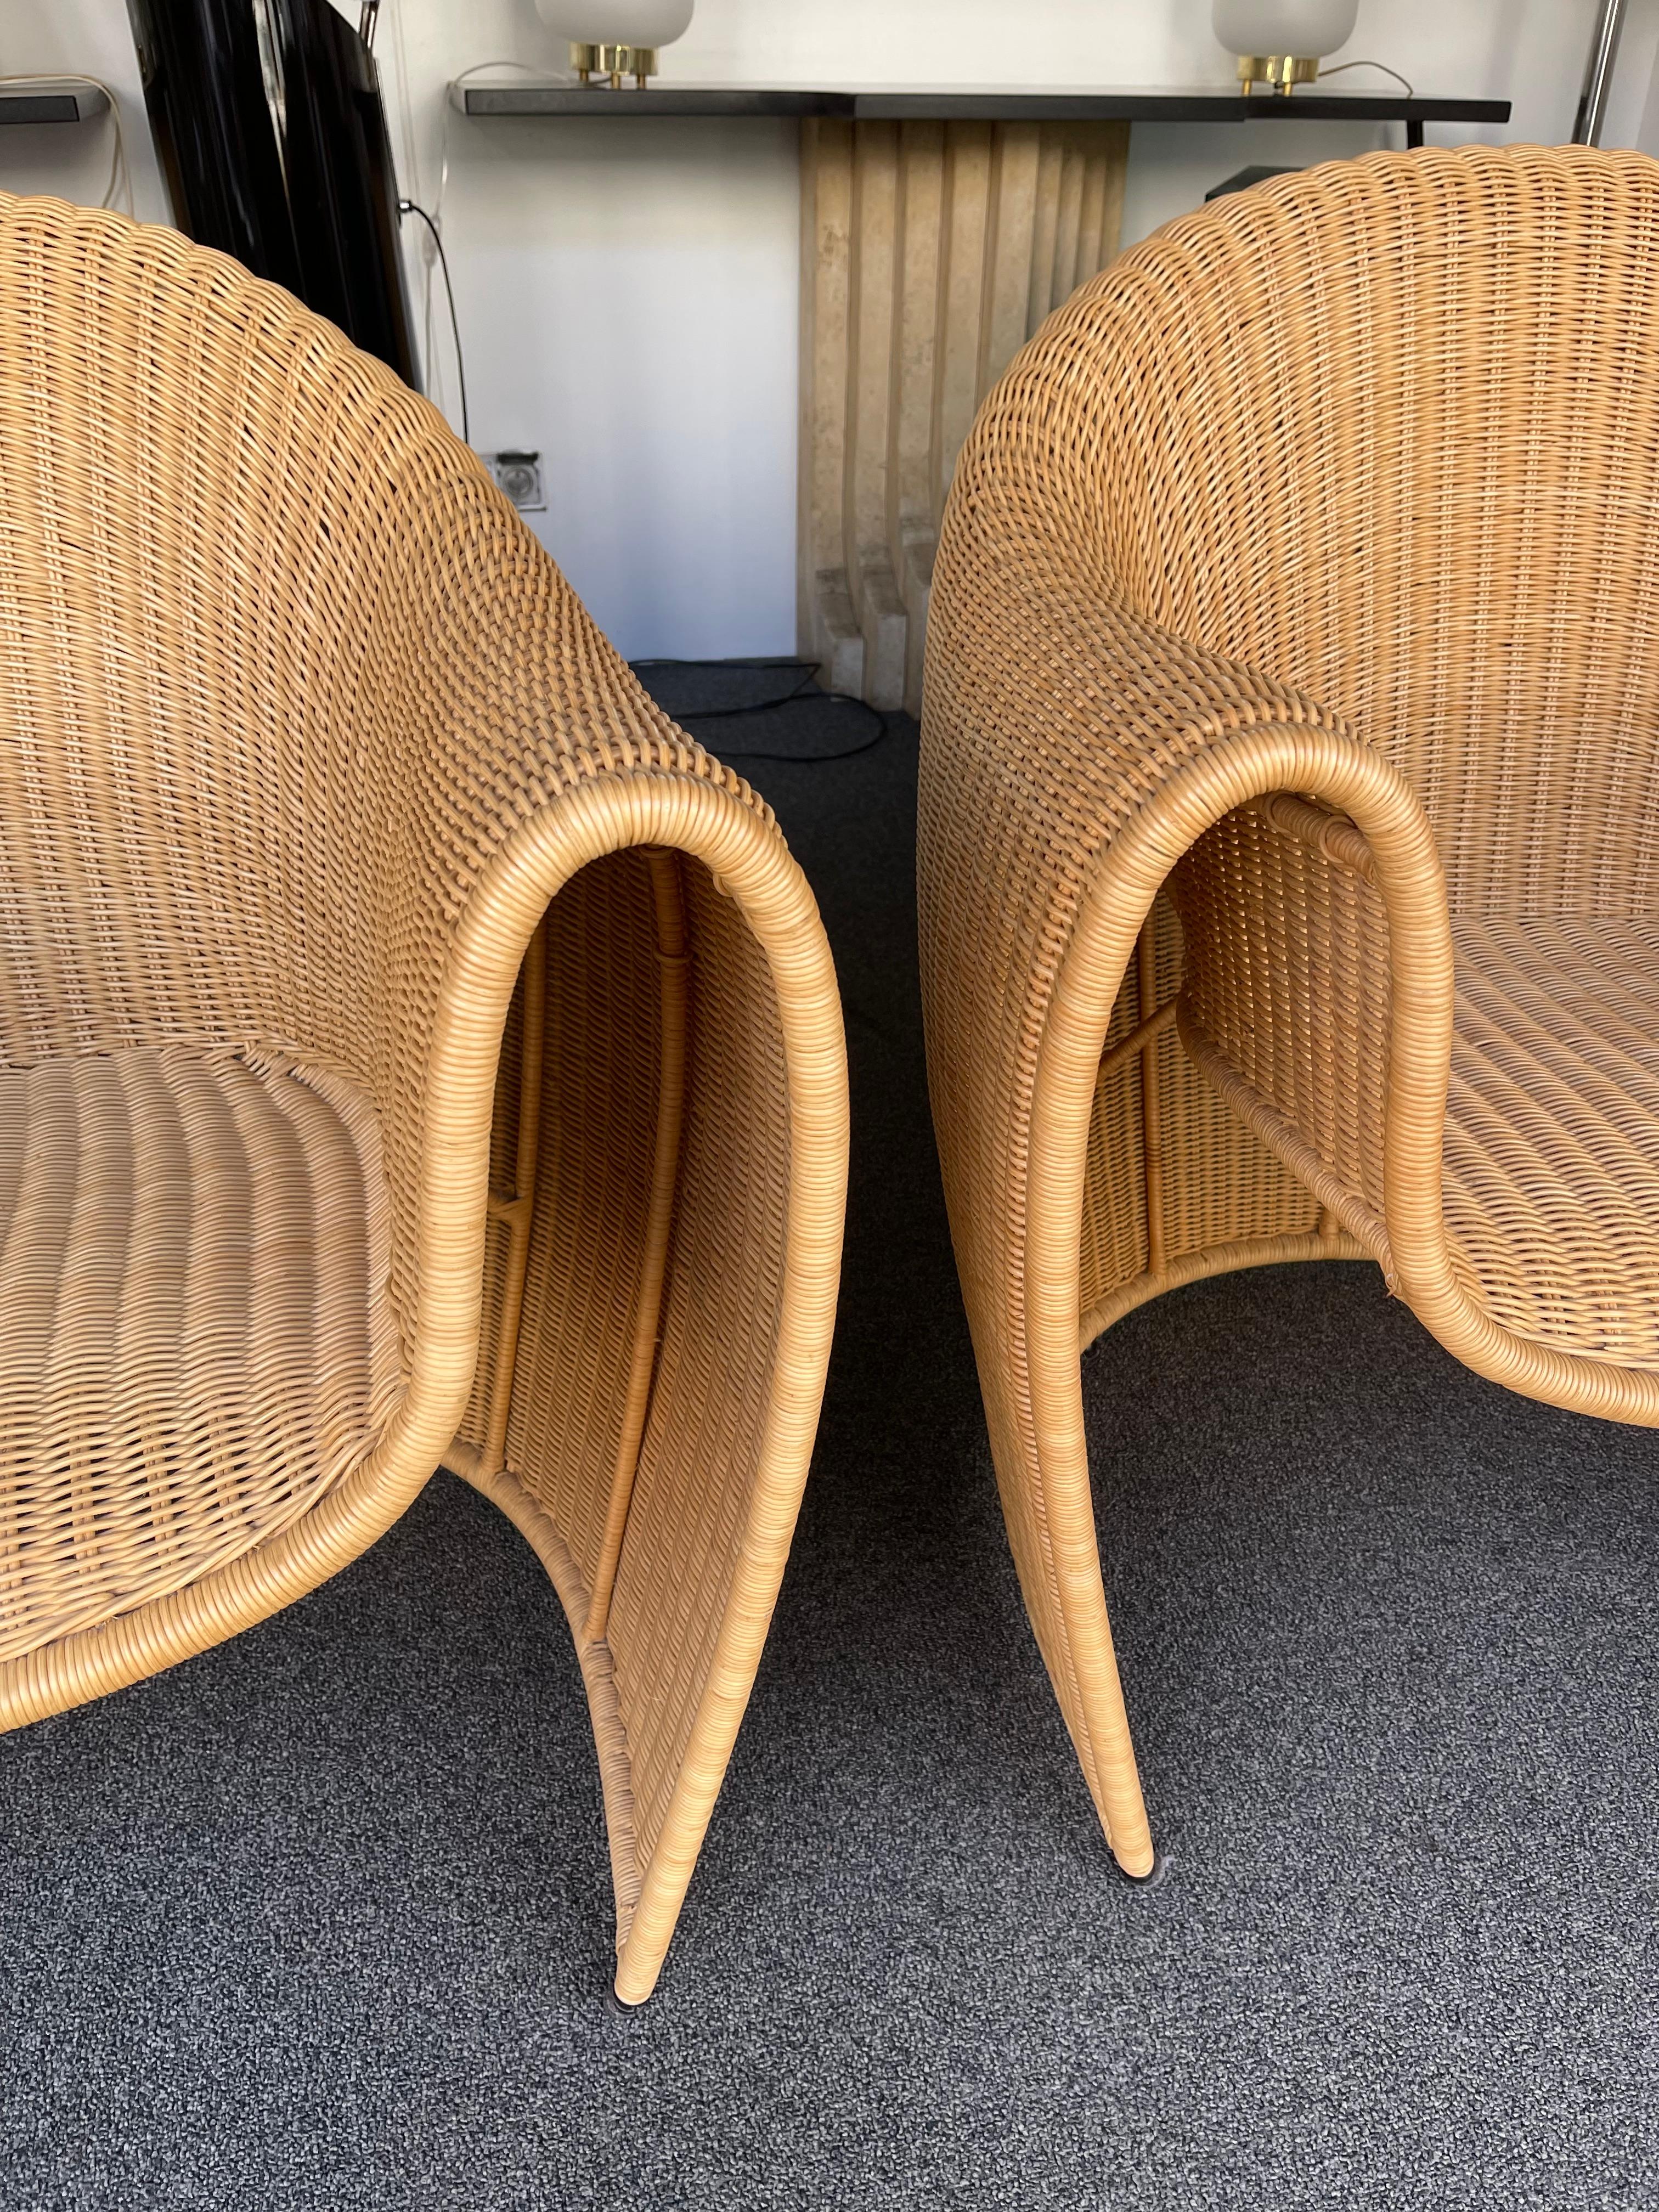 Pair of King Tubby Rattan Armchairs by Platt & Young for Driade, Italy, 1990s For Sale 6